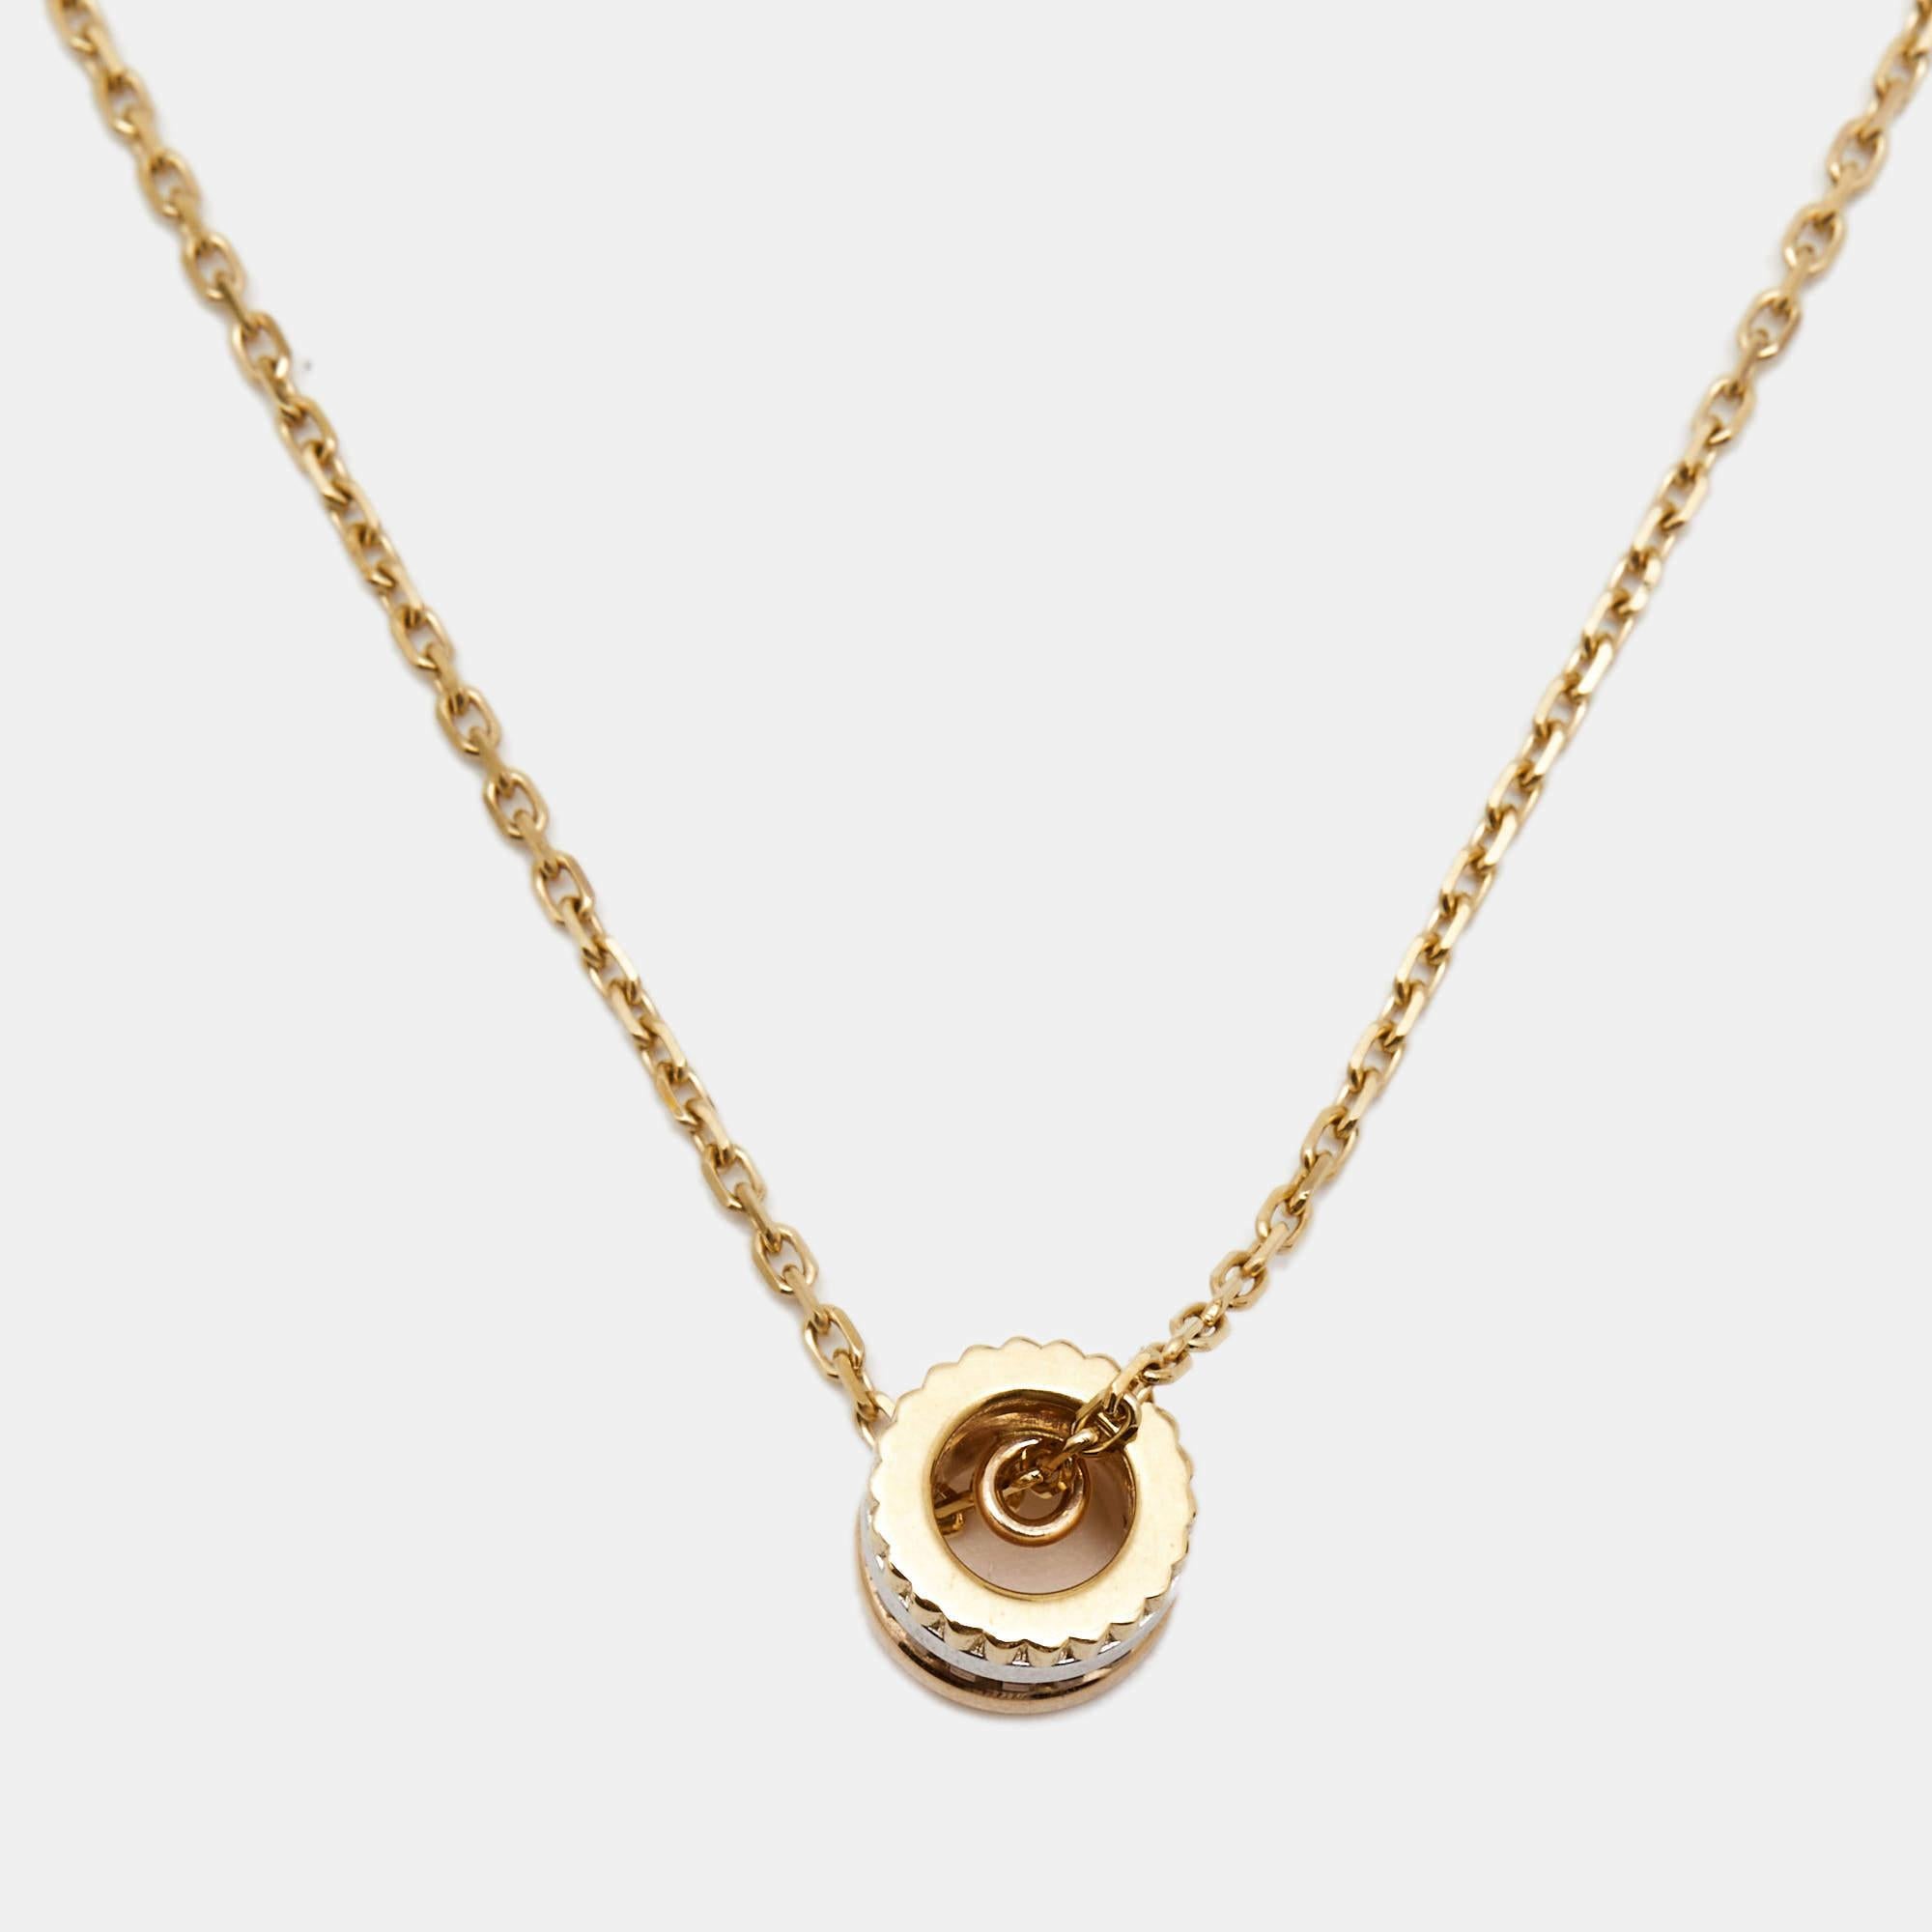 Boucheron's Quatre collection beautifully presents the spirit of the brand, exemplifying craftsmanship and an intricate play of textures and gold. The very collection gifts us this stellar necklace, which has a pendant arranged in 18k white, yellow,